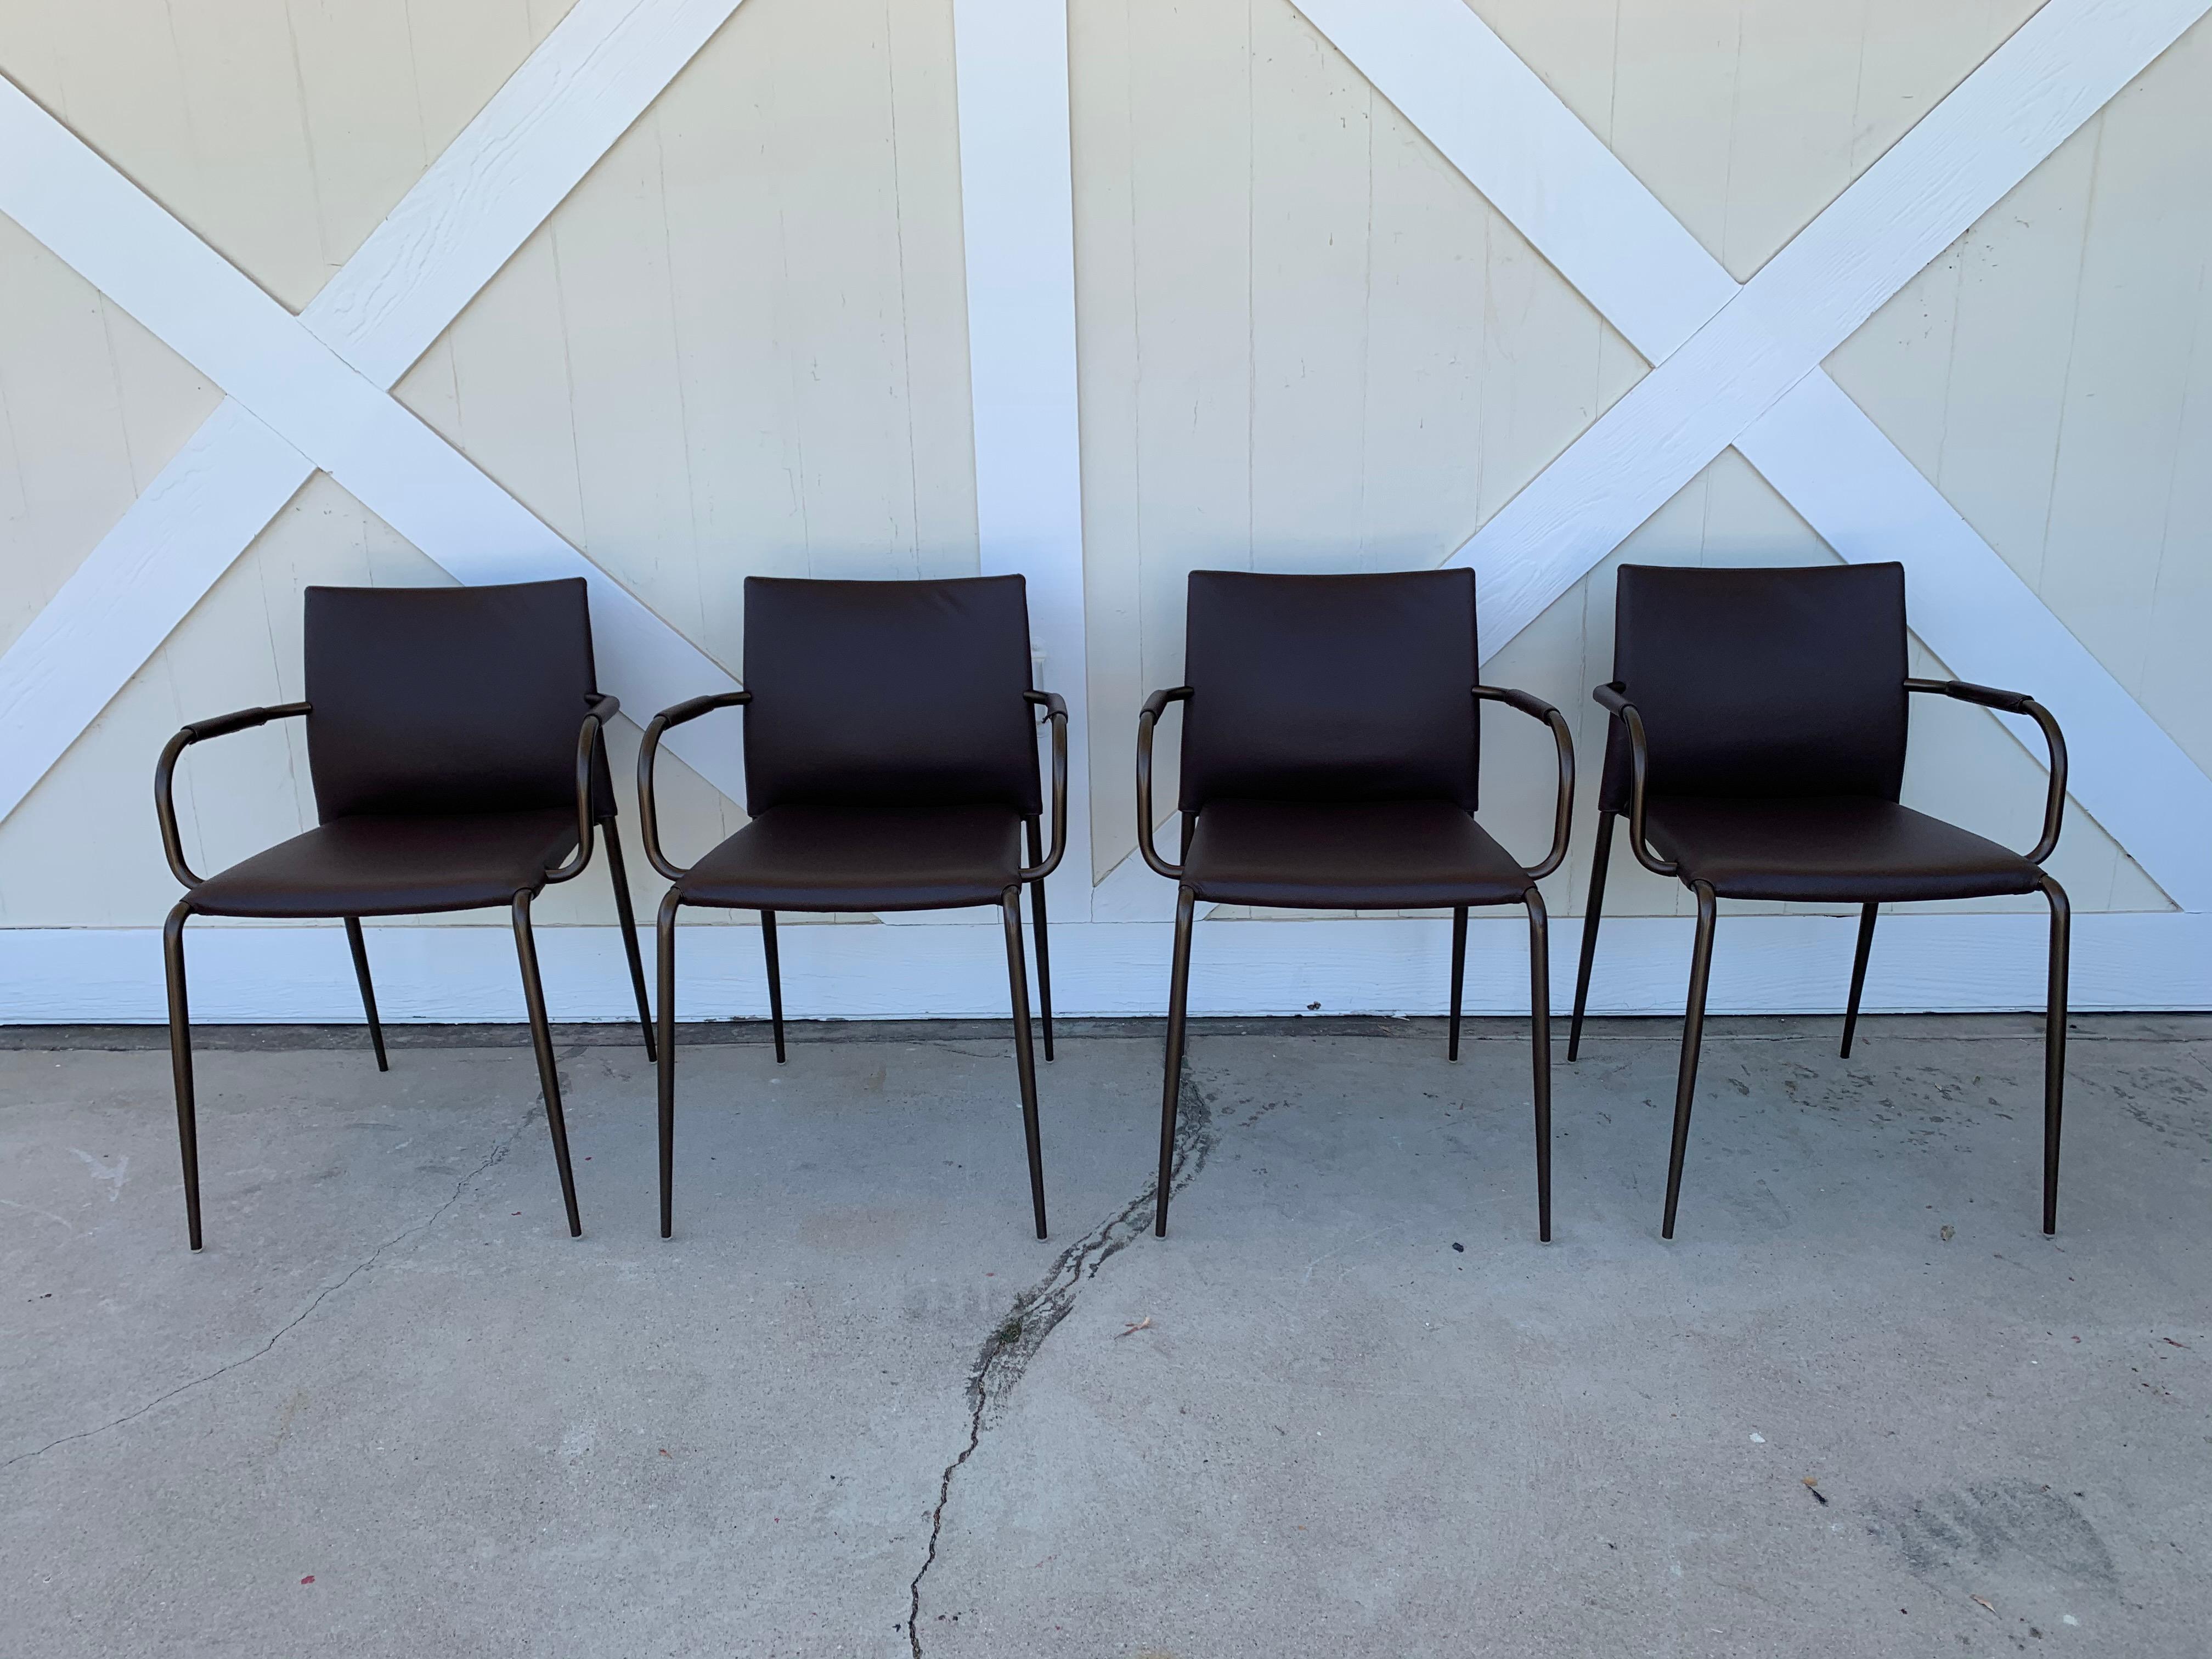 Set of four Gazzella carmchairs designed by Tom Kelley and manufactured in Italy by Enrico Pellizzoni.

This armchair is characterized by Minimalist, simple lines synonymous with great elegance. It's stackable and suitable for all contexts, from